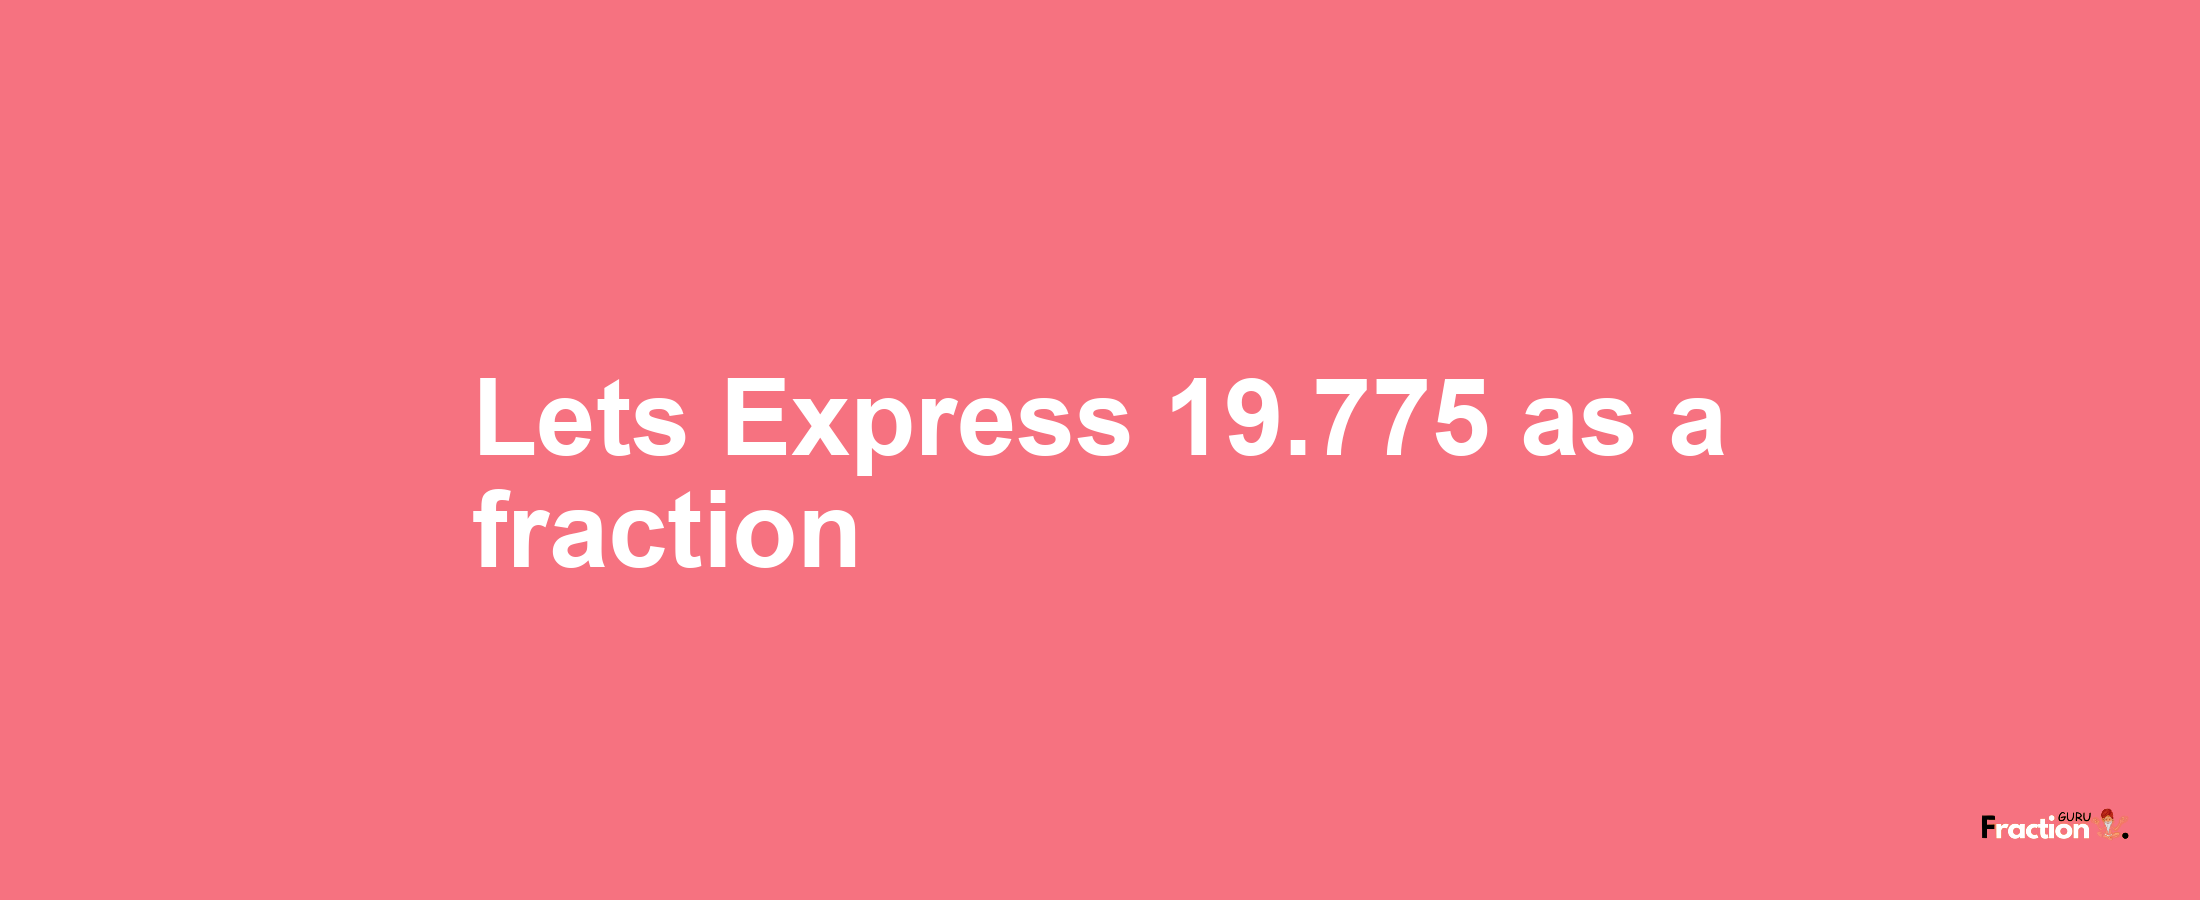 Lets Express 19.775 as afraction